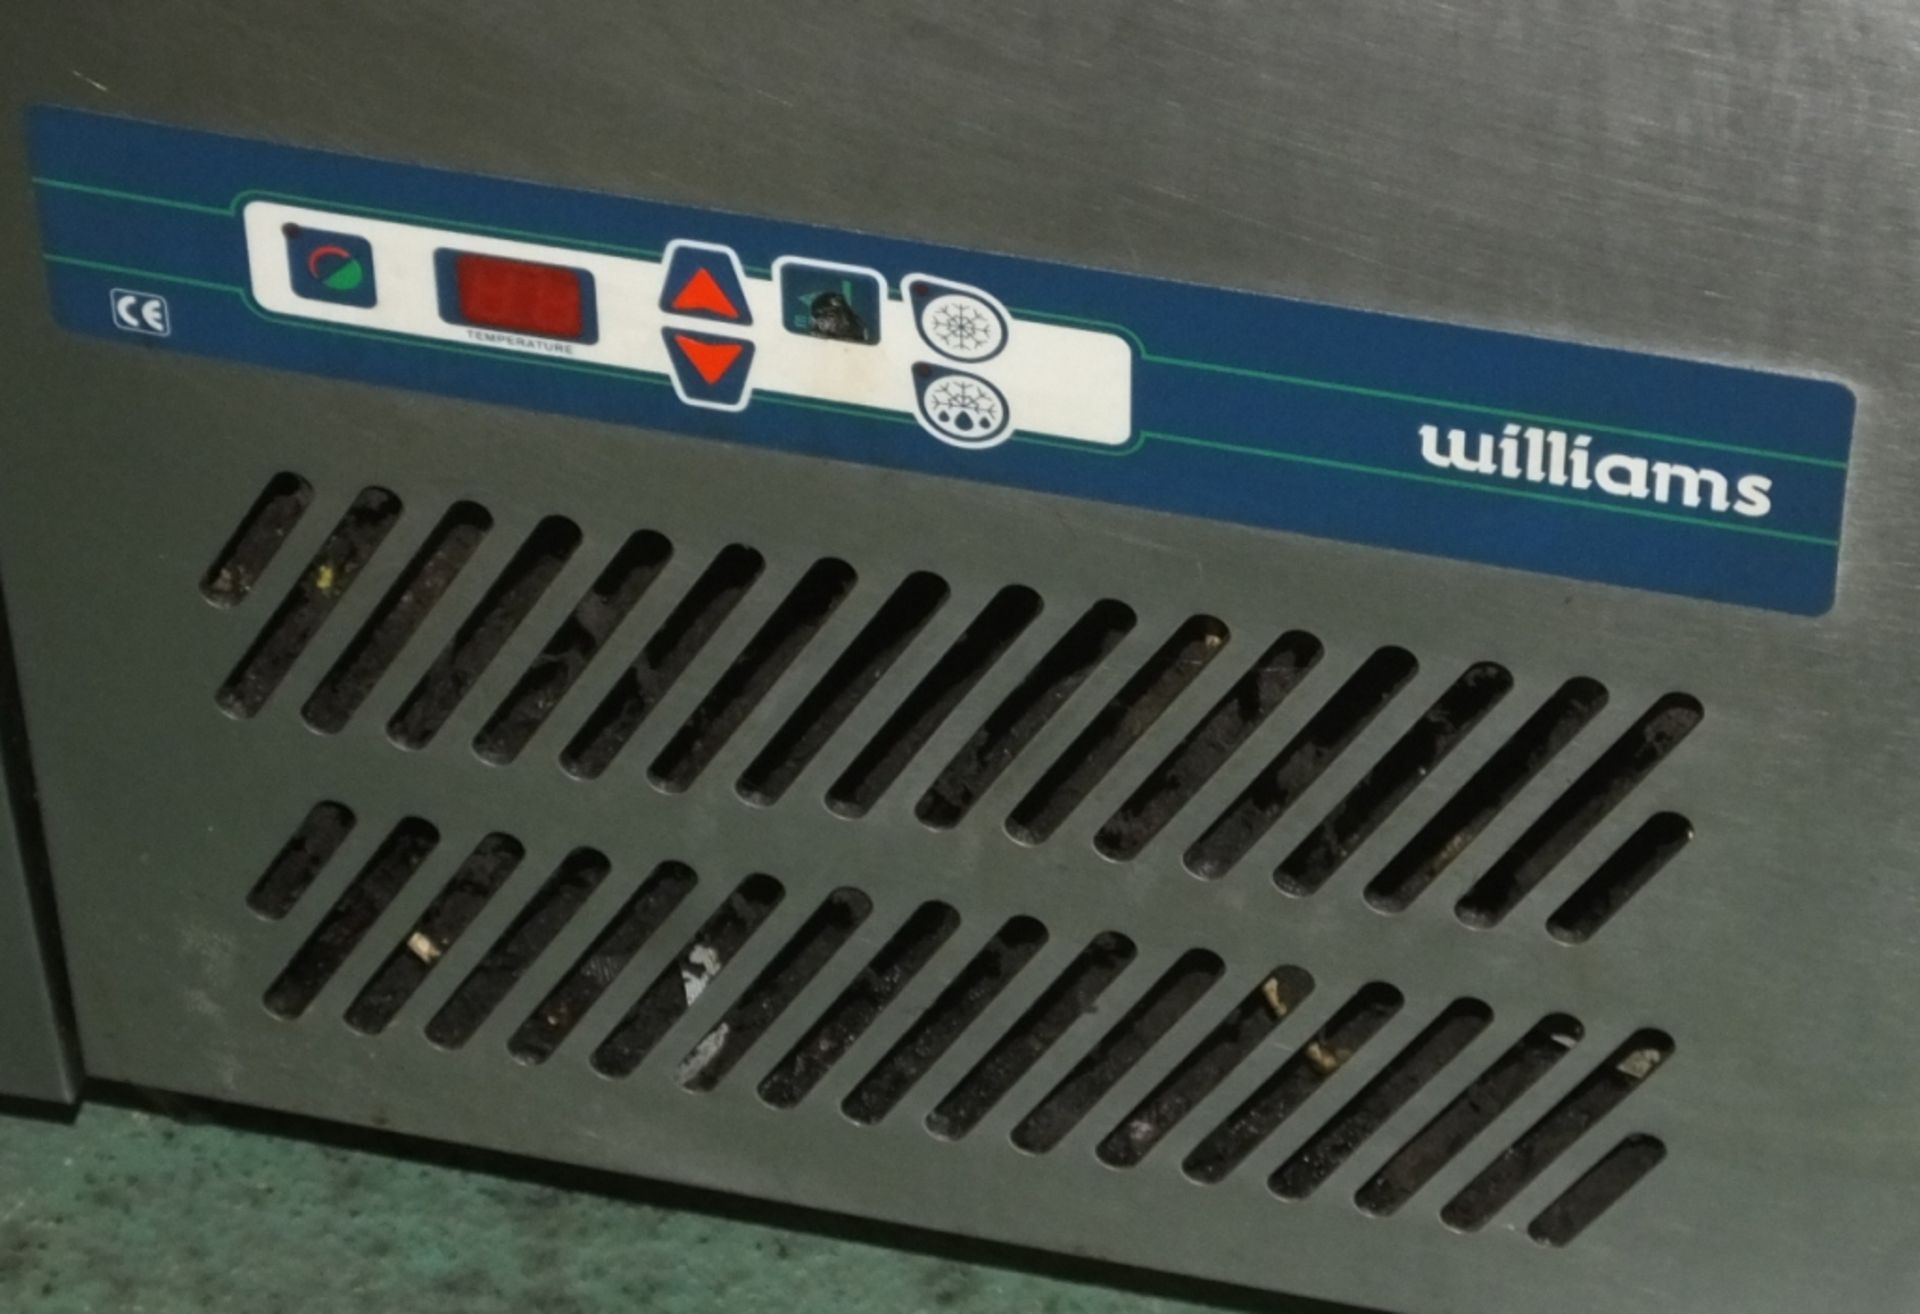 Williams under counter fridge with 2 drawers - Image 3 of 3